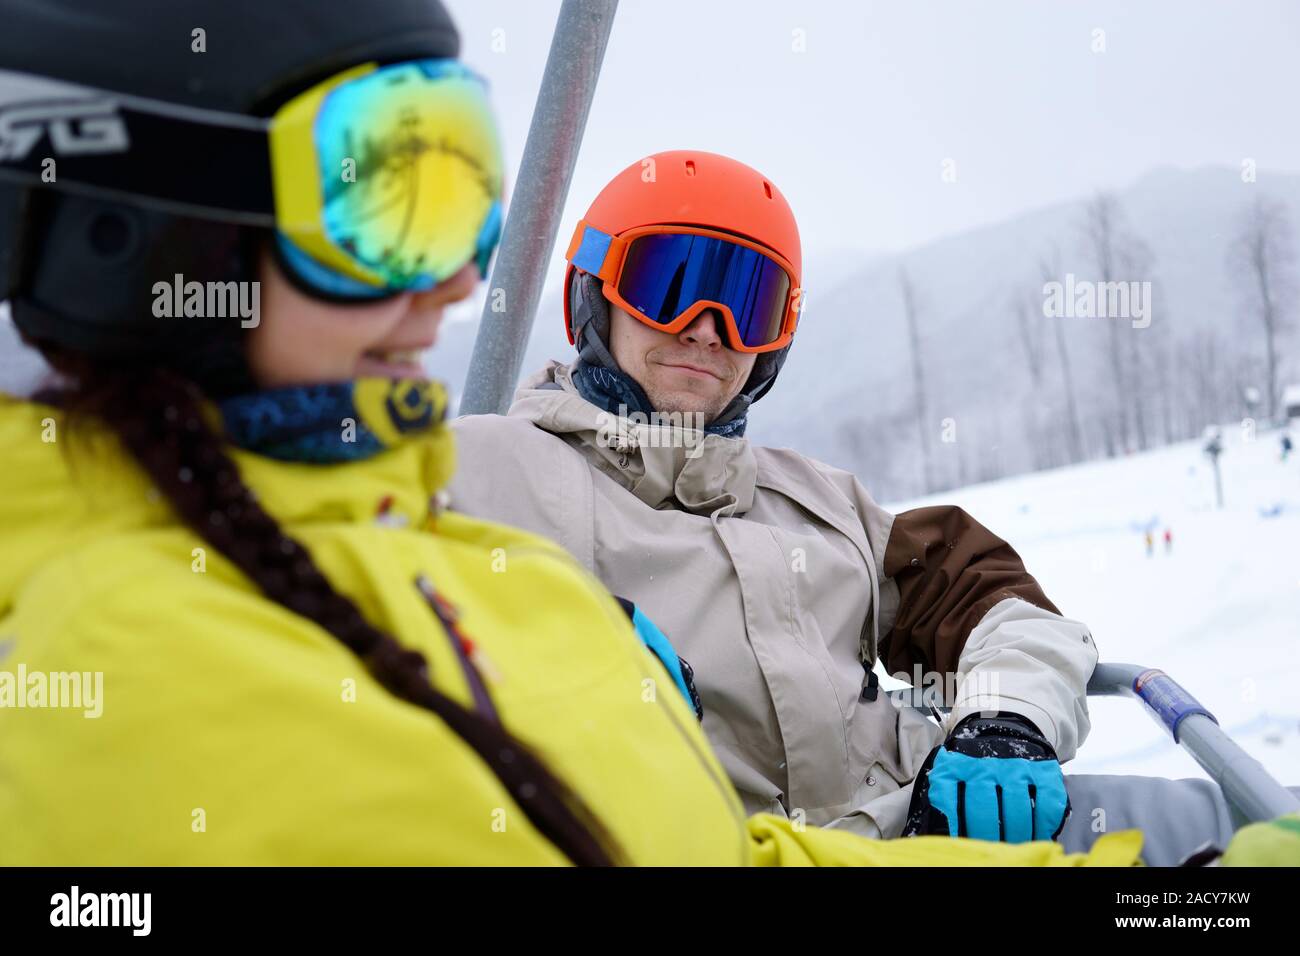 Couple sitting on chairlift in mountain resorts. Stock Photo